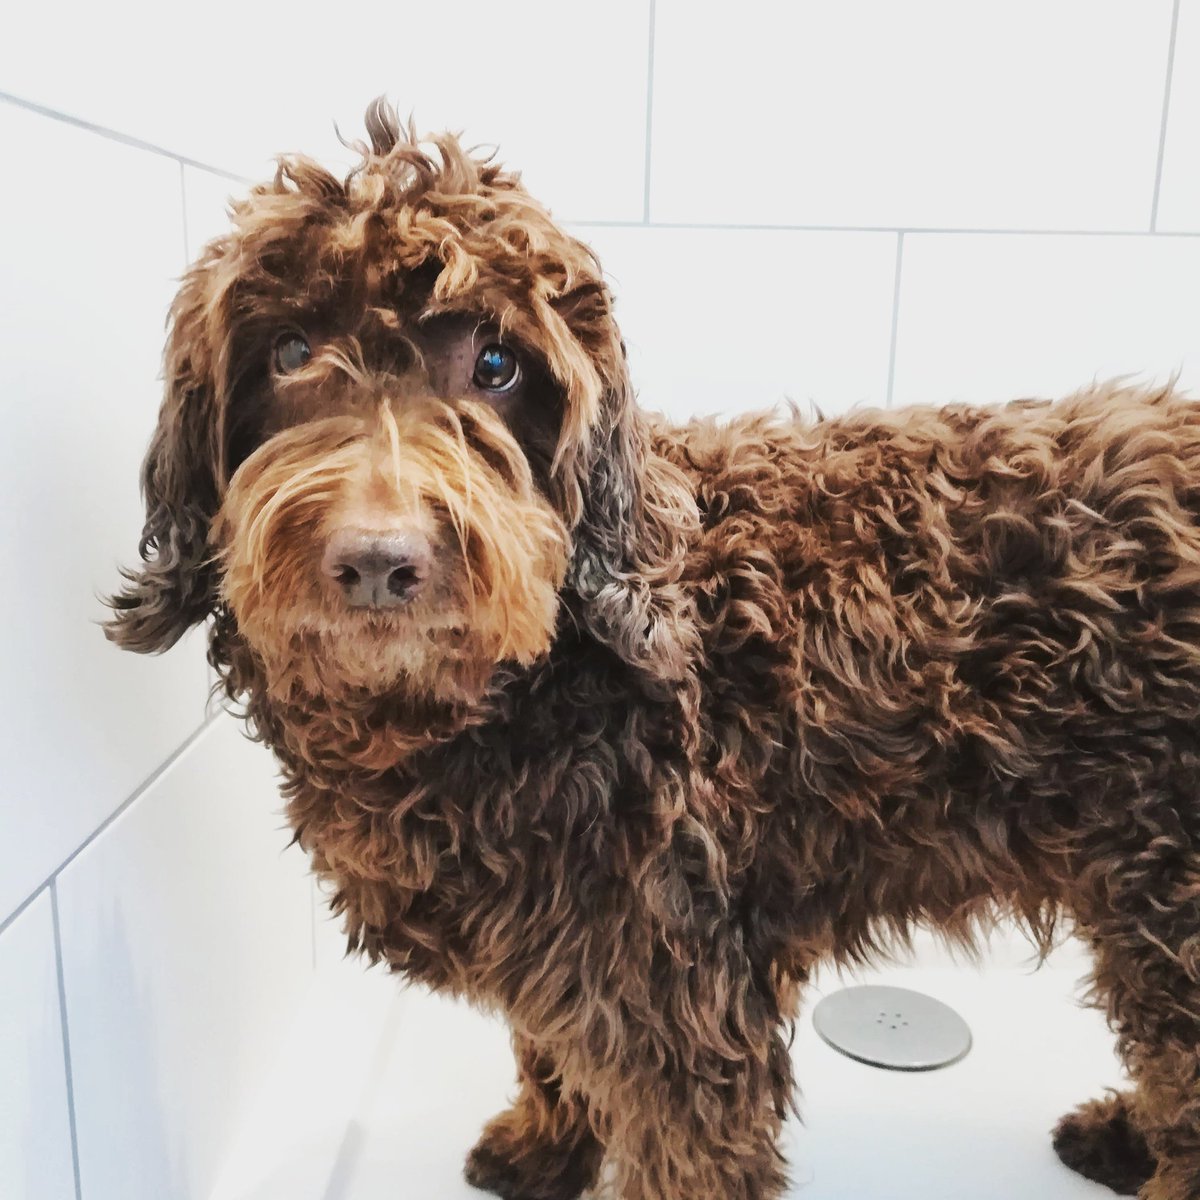 Shower... or bath? Pamper/Spa day for a VIP (very important photoshoot) tomorrow. @ESNEFT @RSPCA_official @PetsAsTherapyUK #puppyfarmsurvivor #petsastherapy #rescuedog #nhs